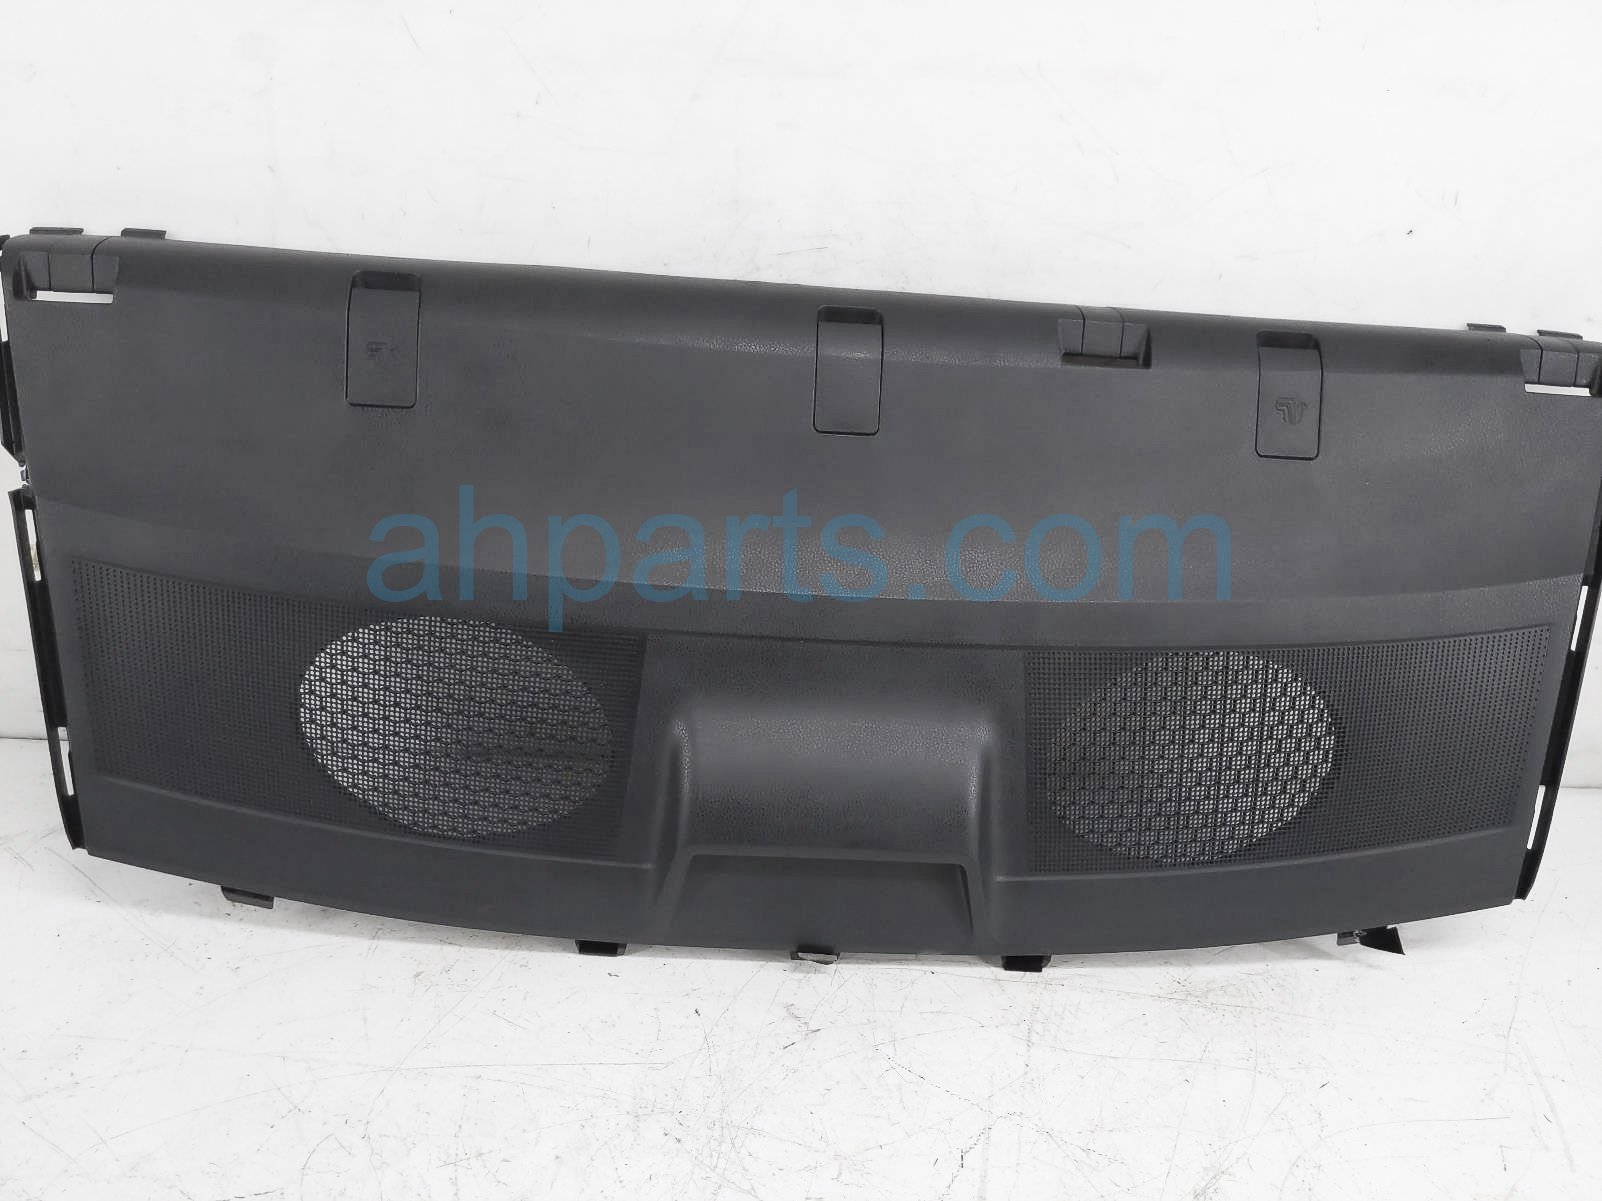 Sold 2014 Toyota Corolla Package Tray Liner - Black 64330-02A50-C0